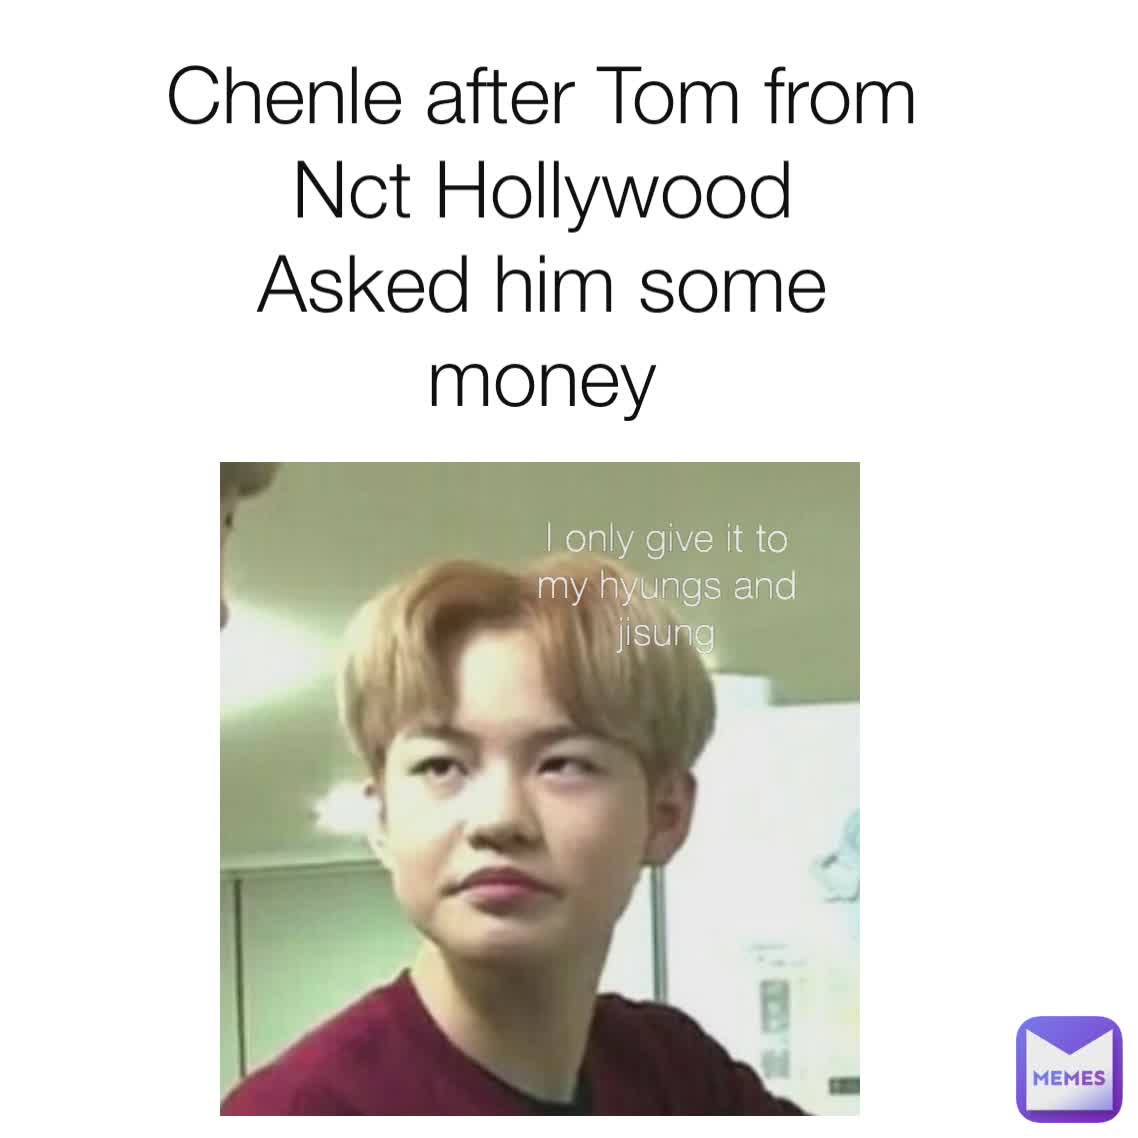 Chenle after Tom from
Nct Hollywood
Asked him some money I only give it to my hyungs and jisung